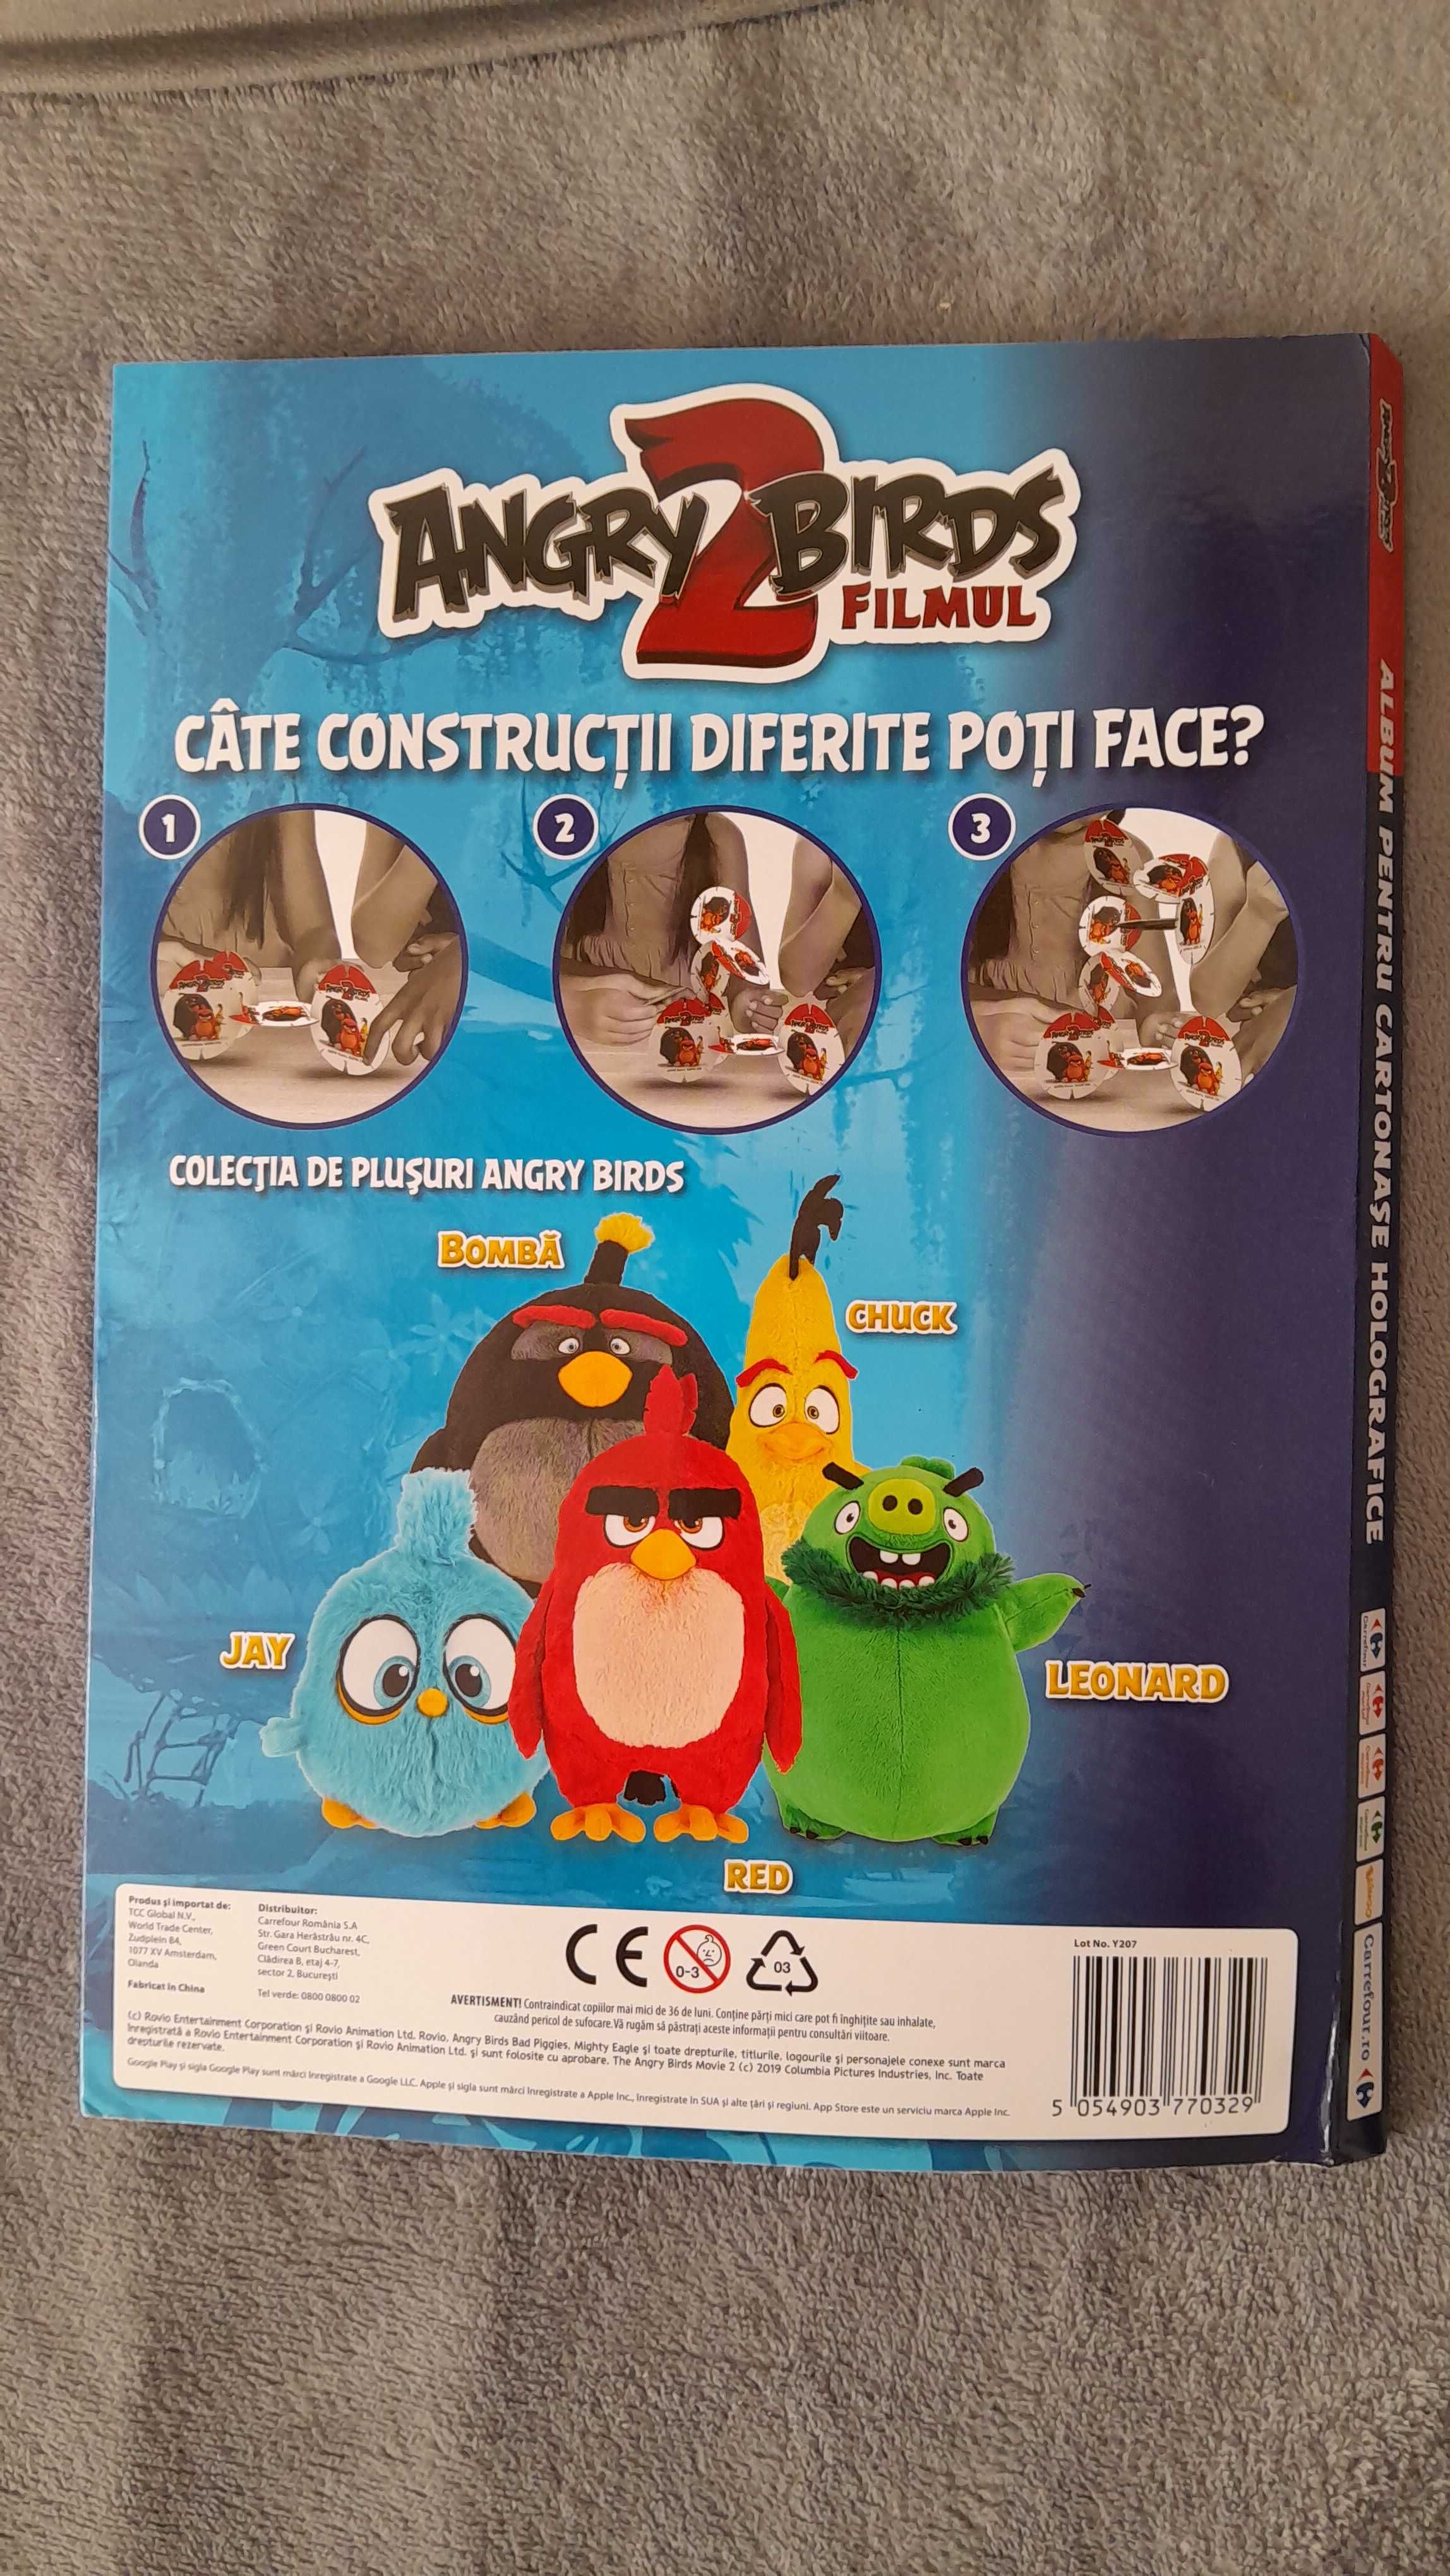 Album complet Angry birds 2